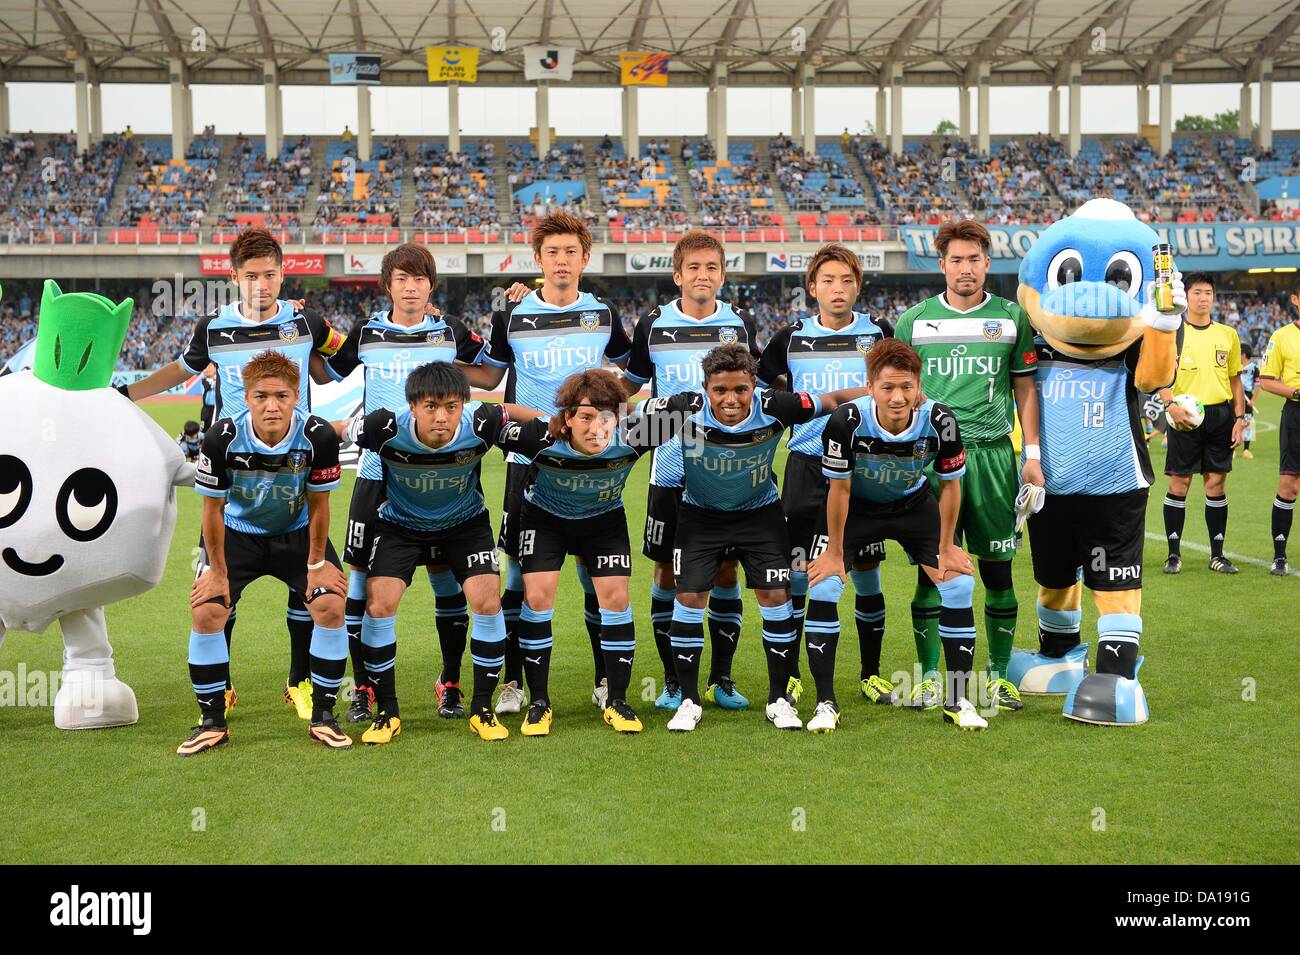 Kawasaki Frontale Team Group Line Up Hi Res Stock Photography And Images Alamy